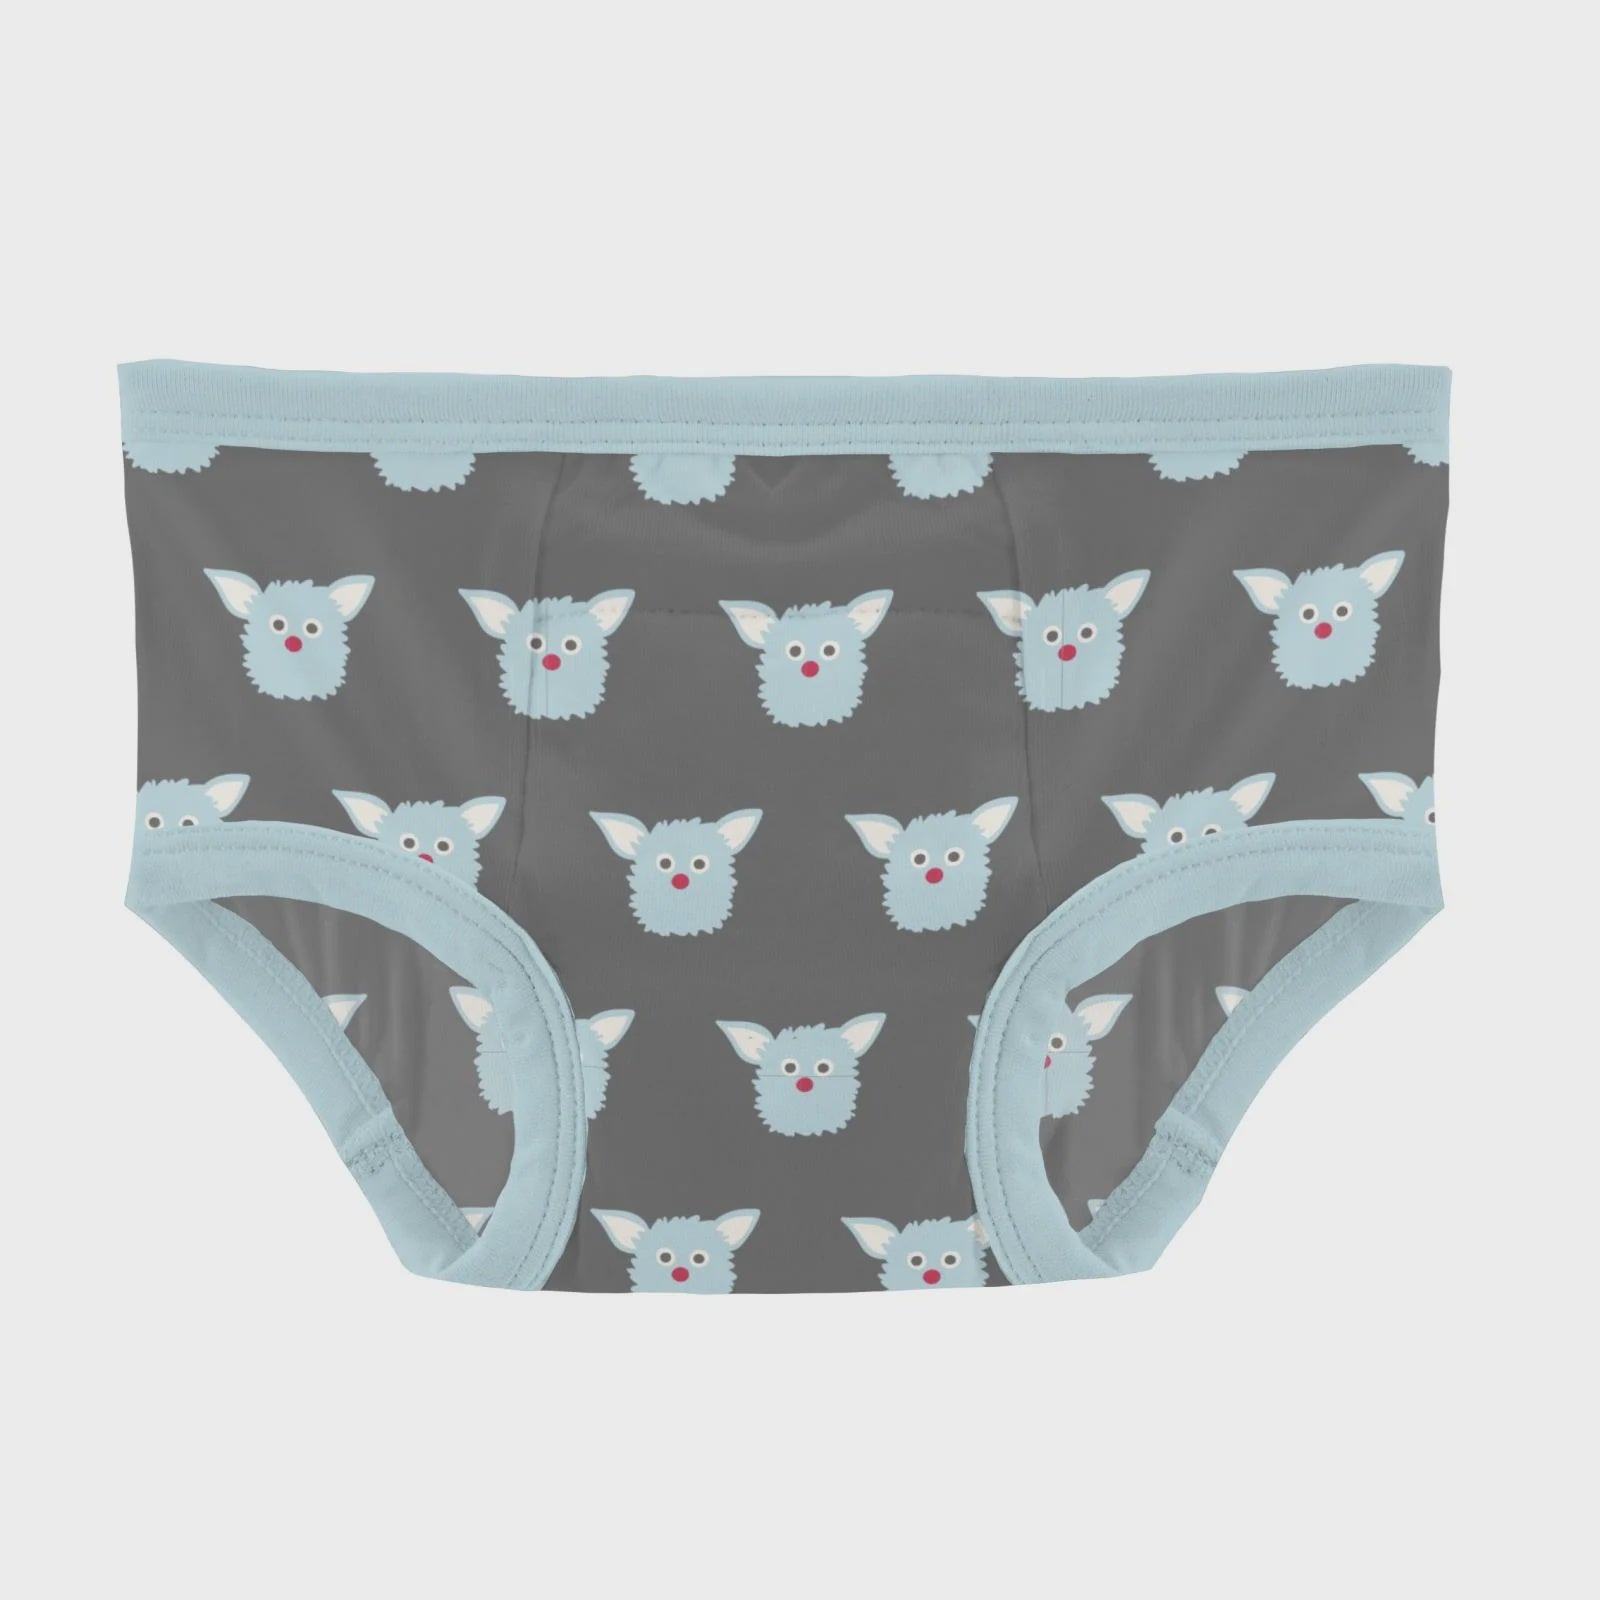 Pewter Furry Friend's Training Pant's